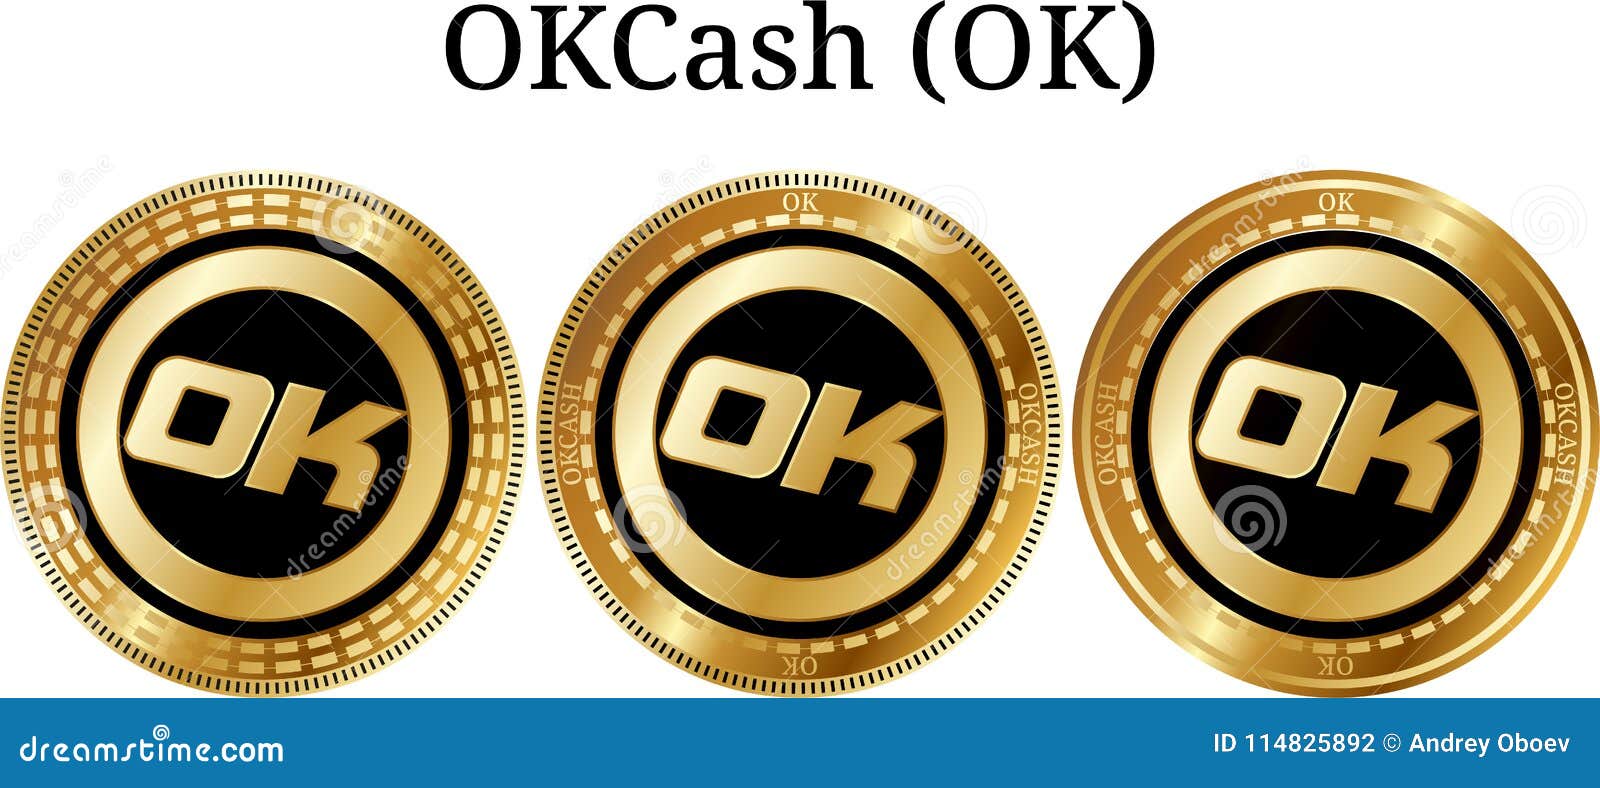 OK | Okcash is the leading multi-chain open-source and energy friendly cryptocurrency DEFI Token